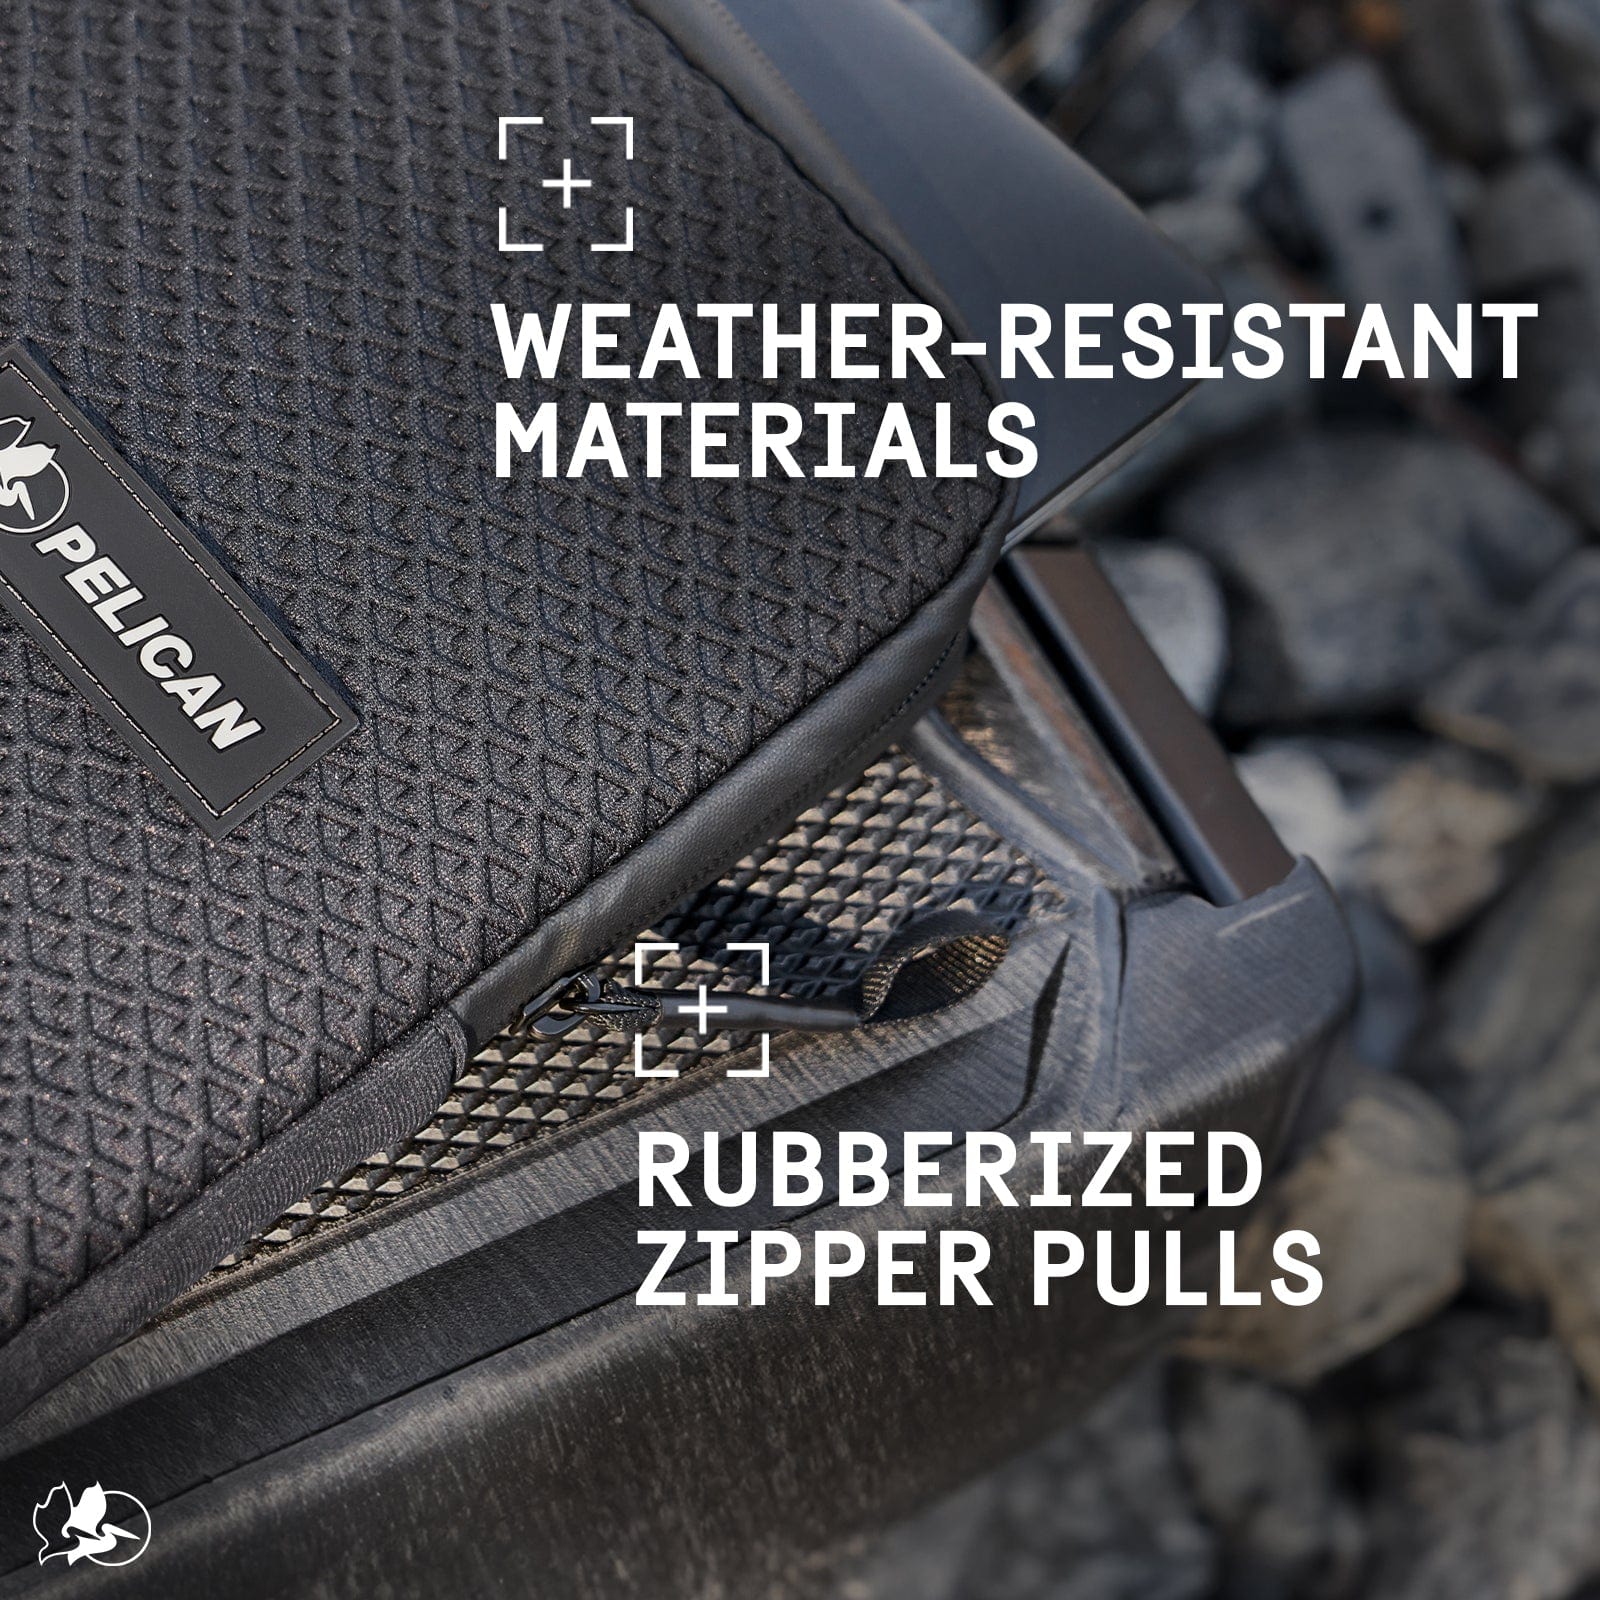 WEATHER-RESISTANT MATERIALS. RUBBERIZED ZIPPER PULLS